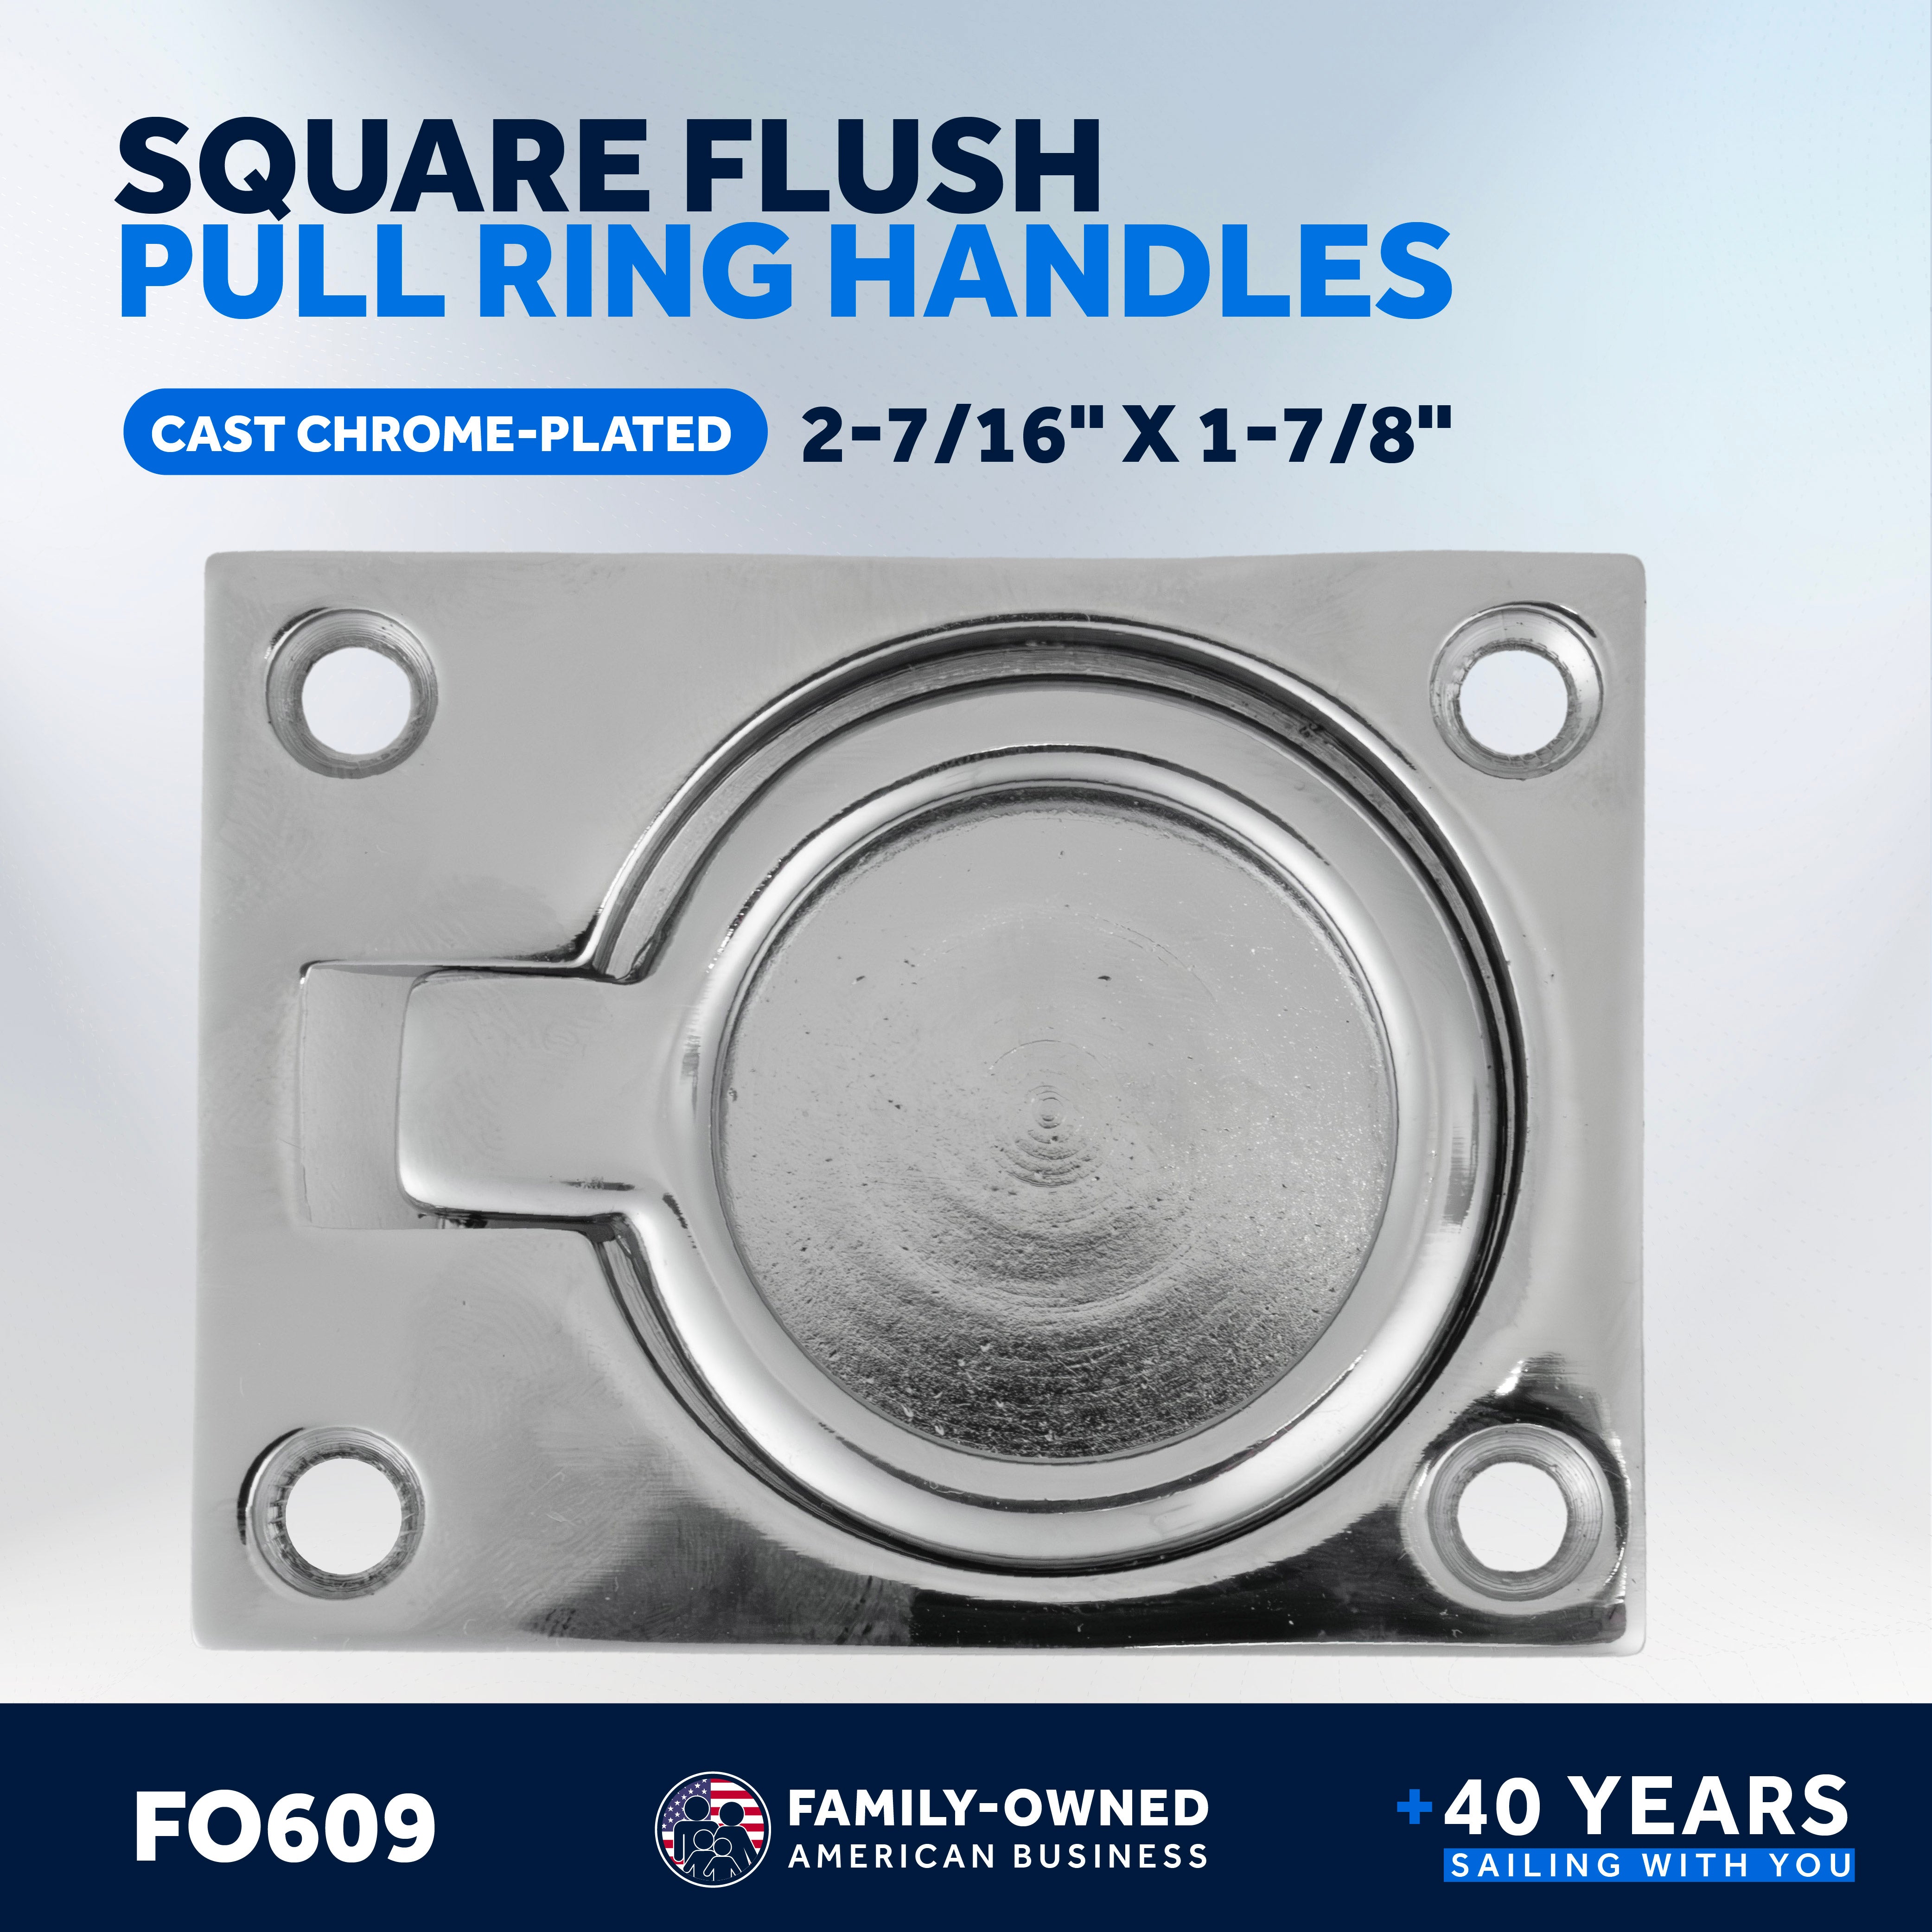 Square Flush Pull Ring Handles 1-7/8" x 2-7/16", 2-Pack - FO609-M2